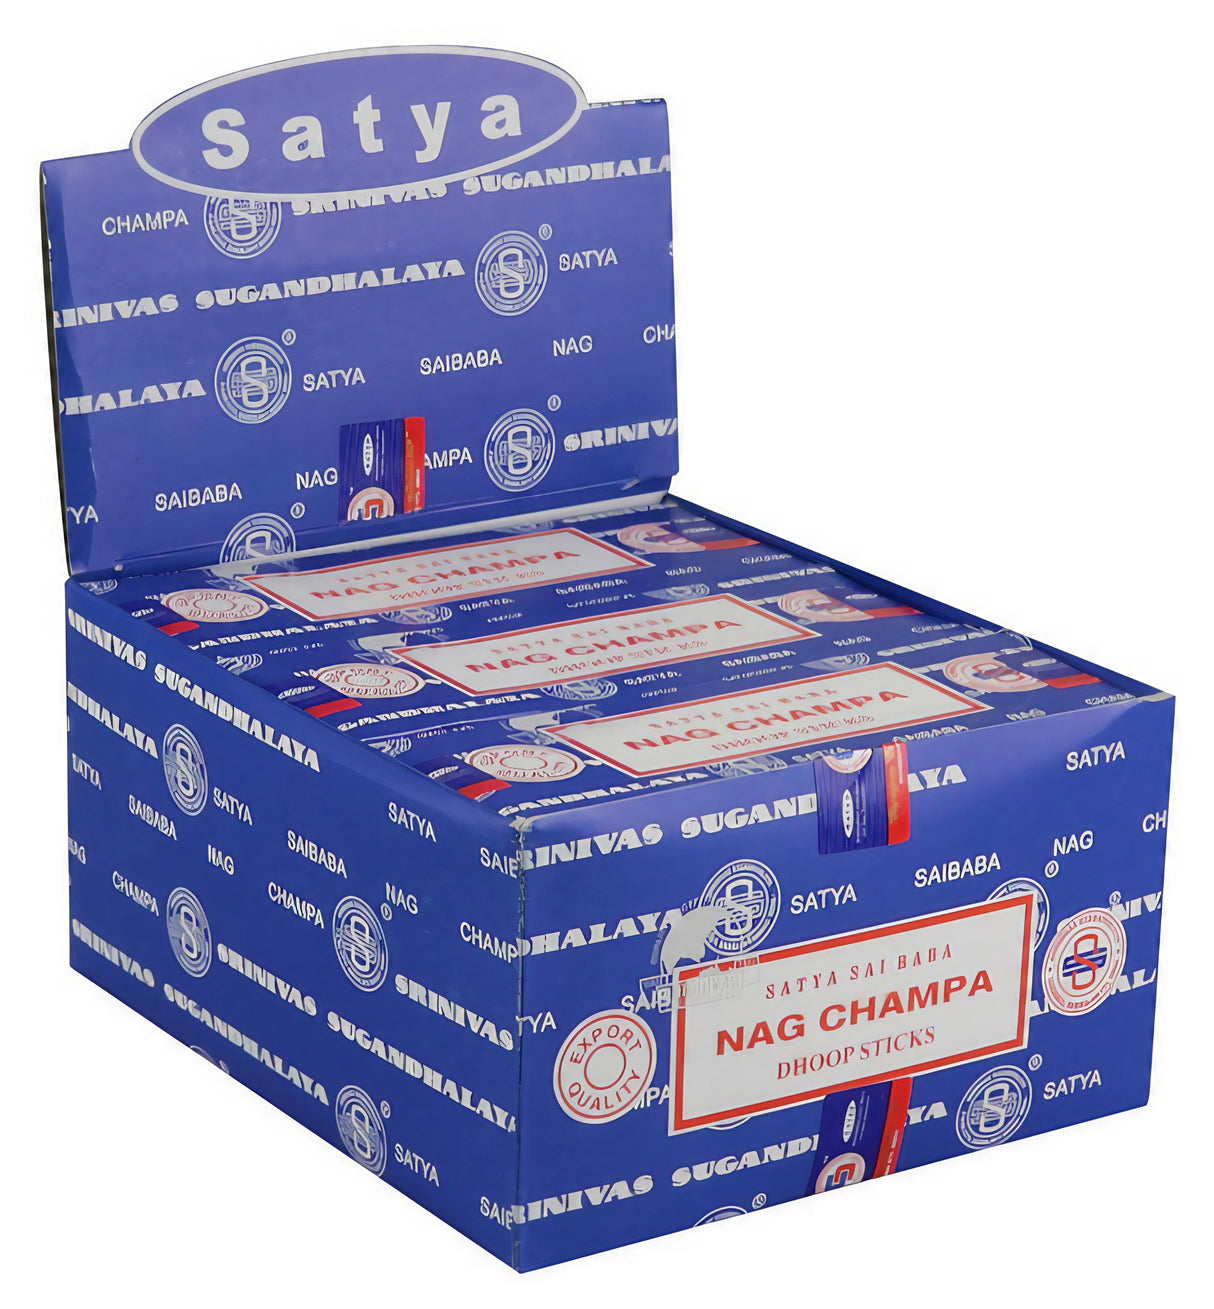 Satya Nag Champa Incense Sticks Display Box, 12 Pack, Front View on White Background